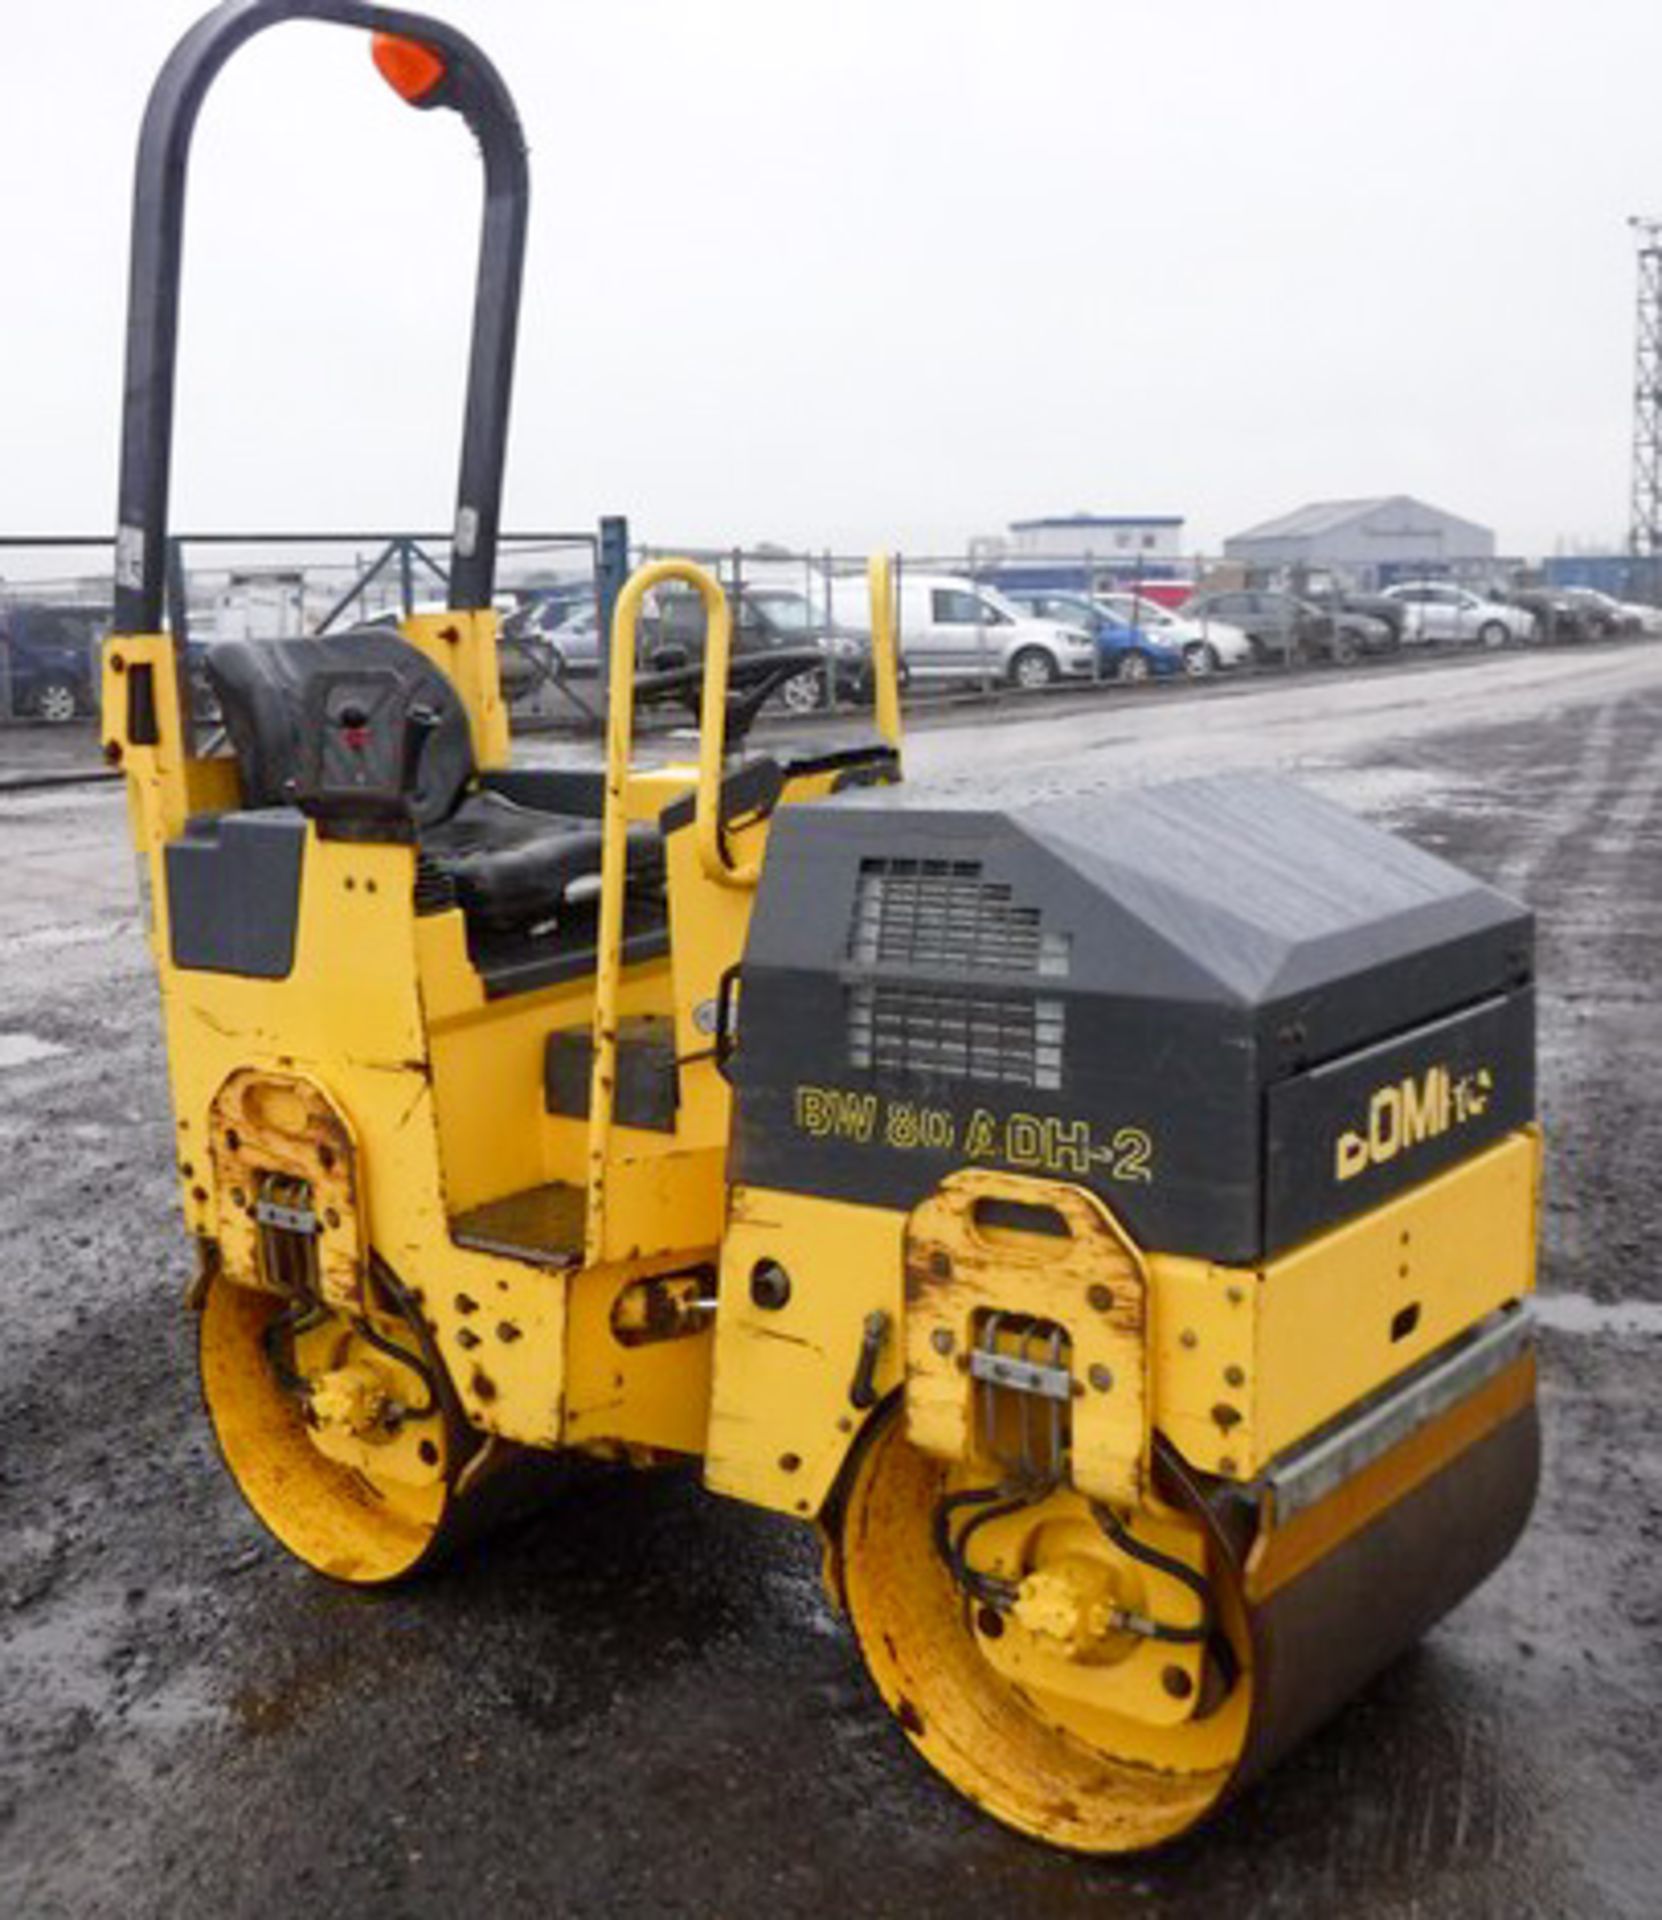 BOMAG BW80 ADH-2 roller. S/N 101460426169. 585hrs (not verified) - Image 6 of 12